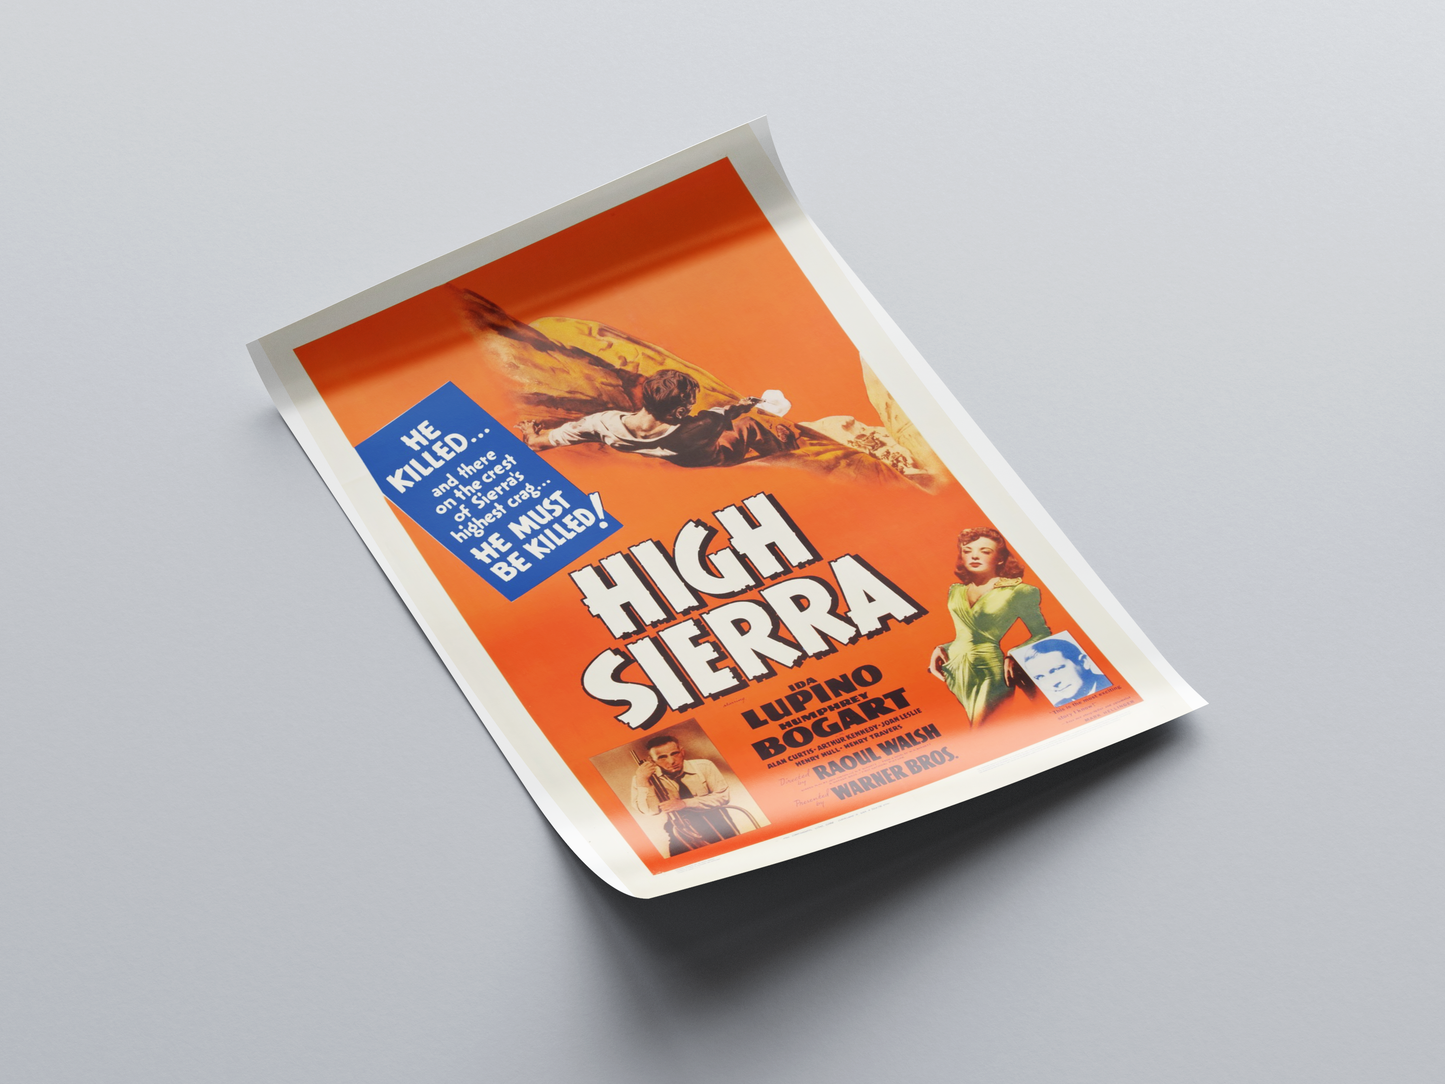 High Sierra (1941) Movie Poster displayed in interior setting